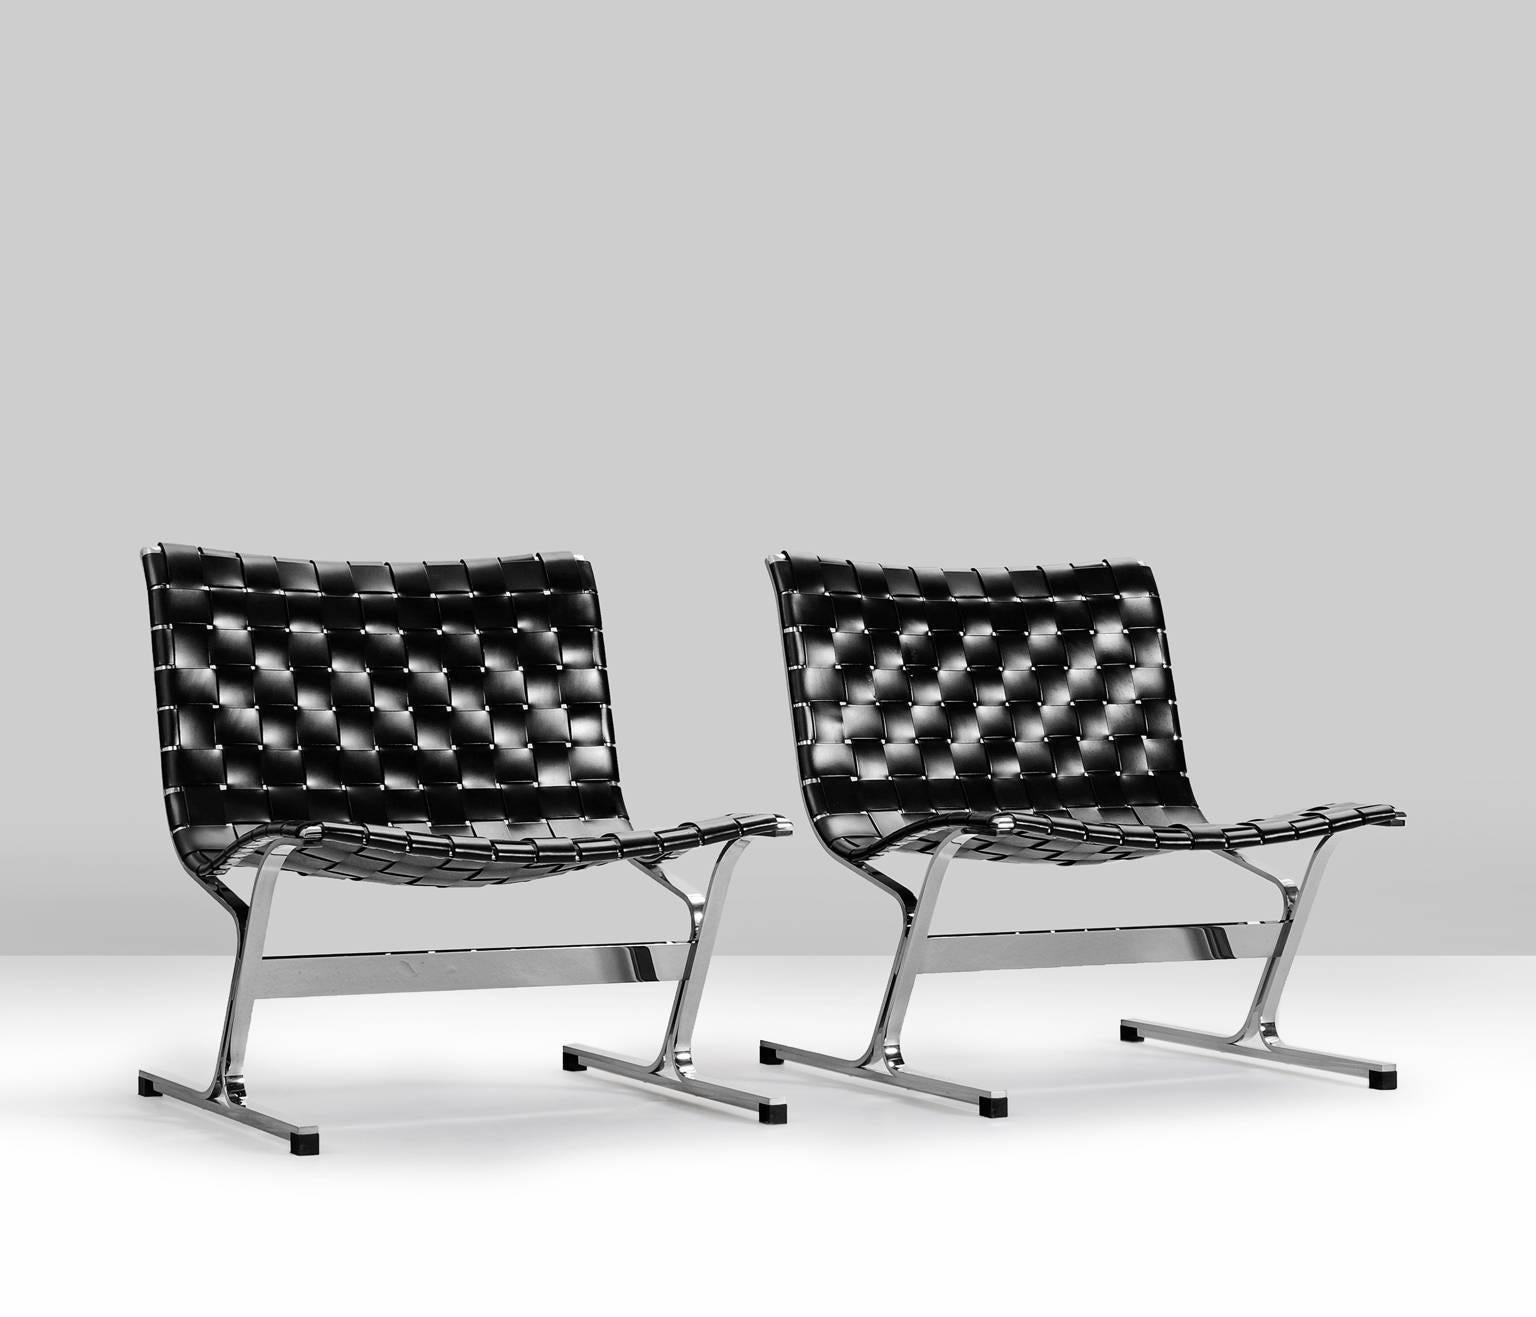 Refined set of two lounge chairs designed by Ross Littell, Milano, Italy, late 1960s.

This appealing set is tressed in an original high quality black saddle leather. Strapped
around an organic designed chromed steel base.

The interwoven